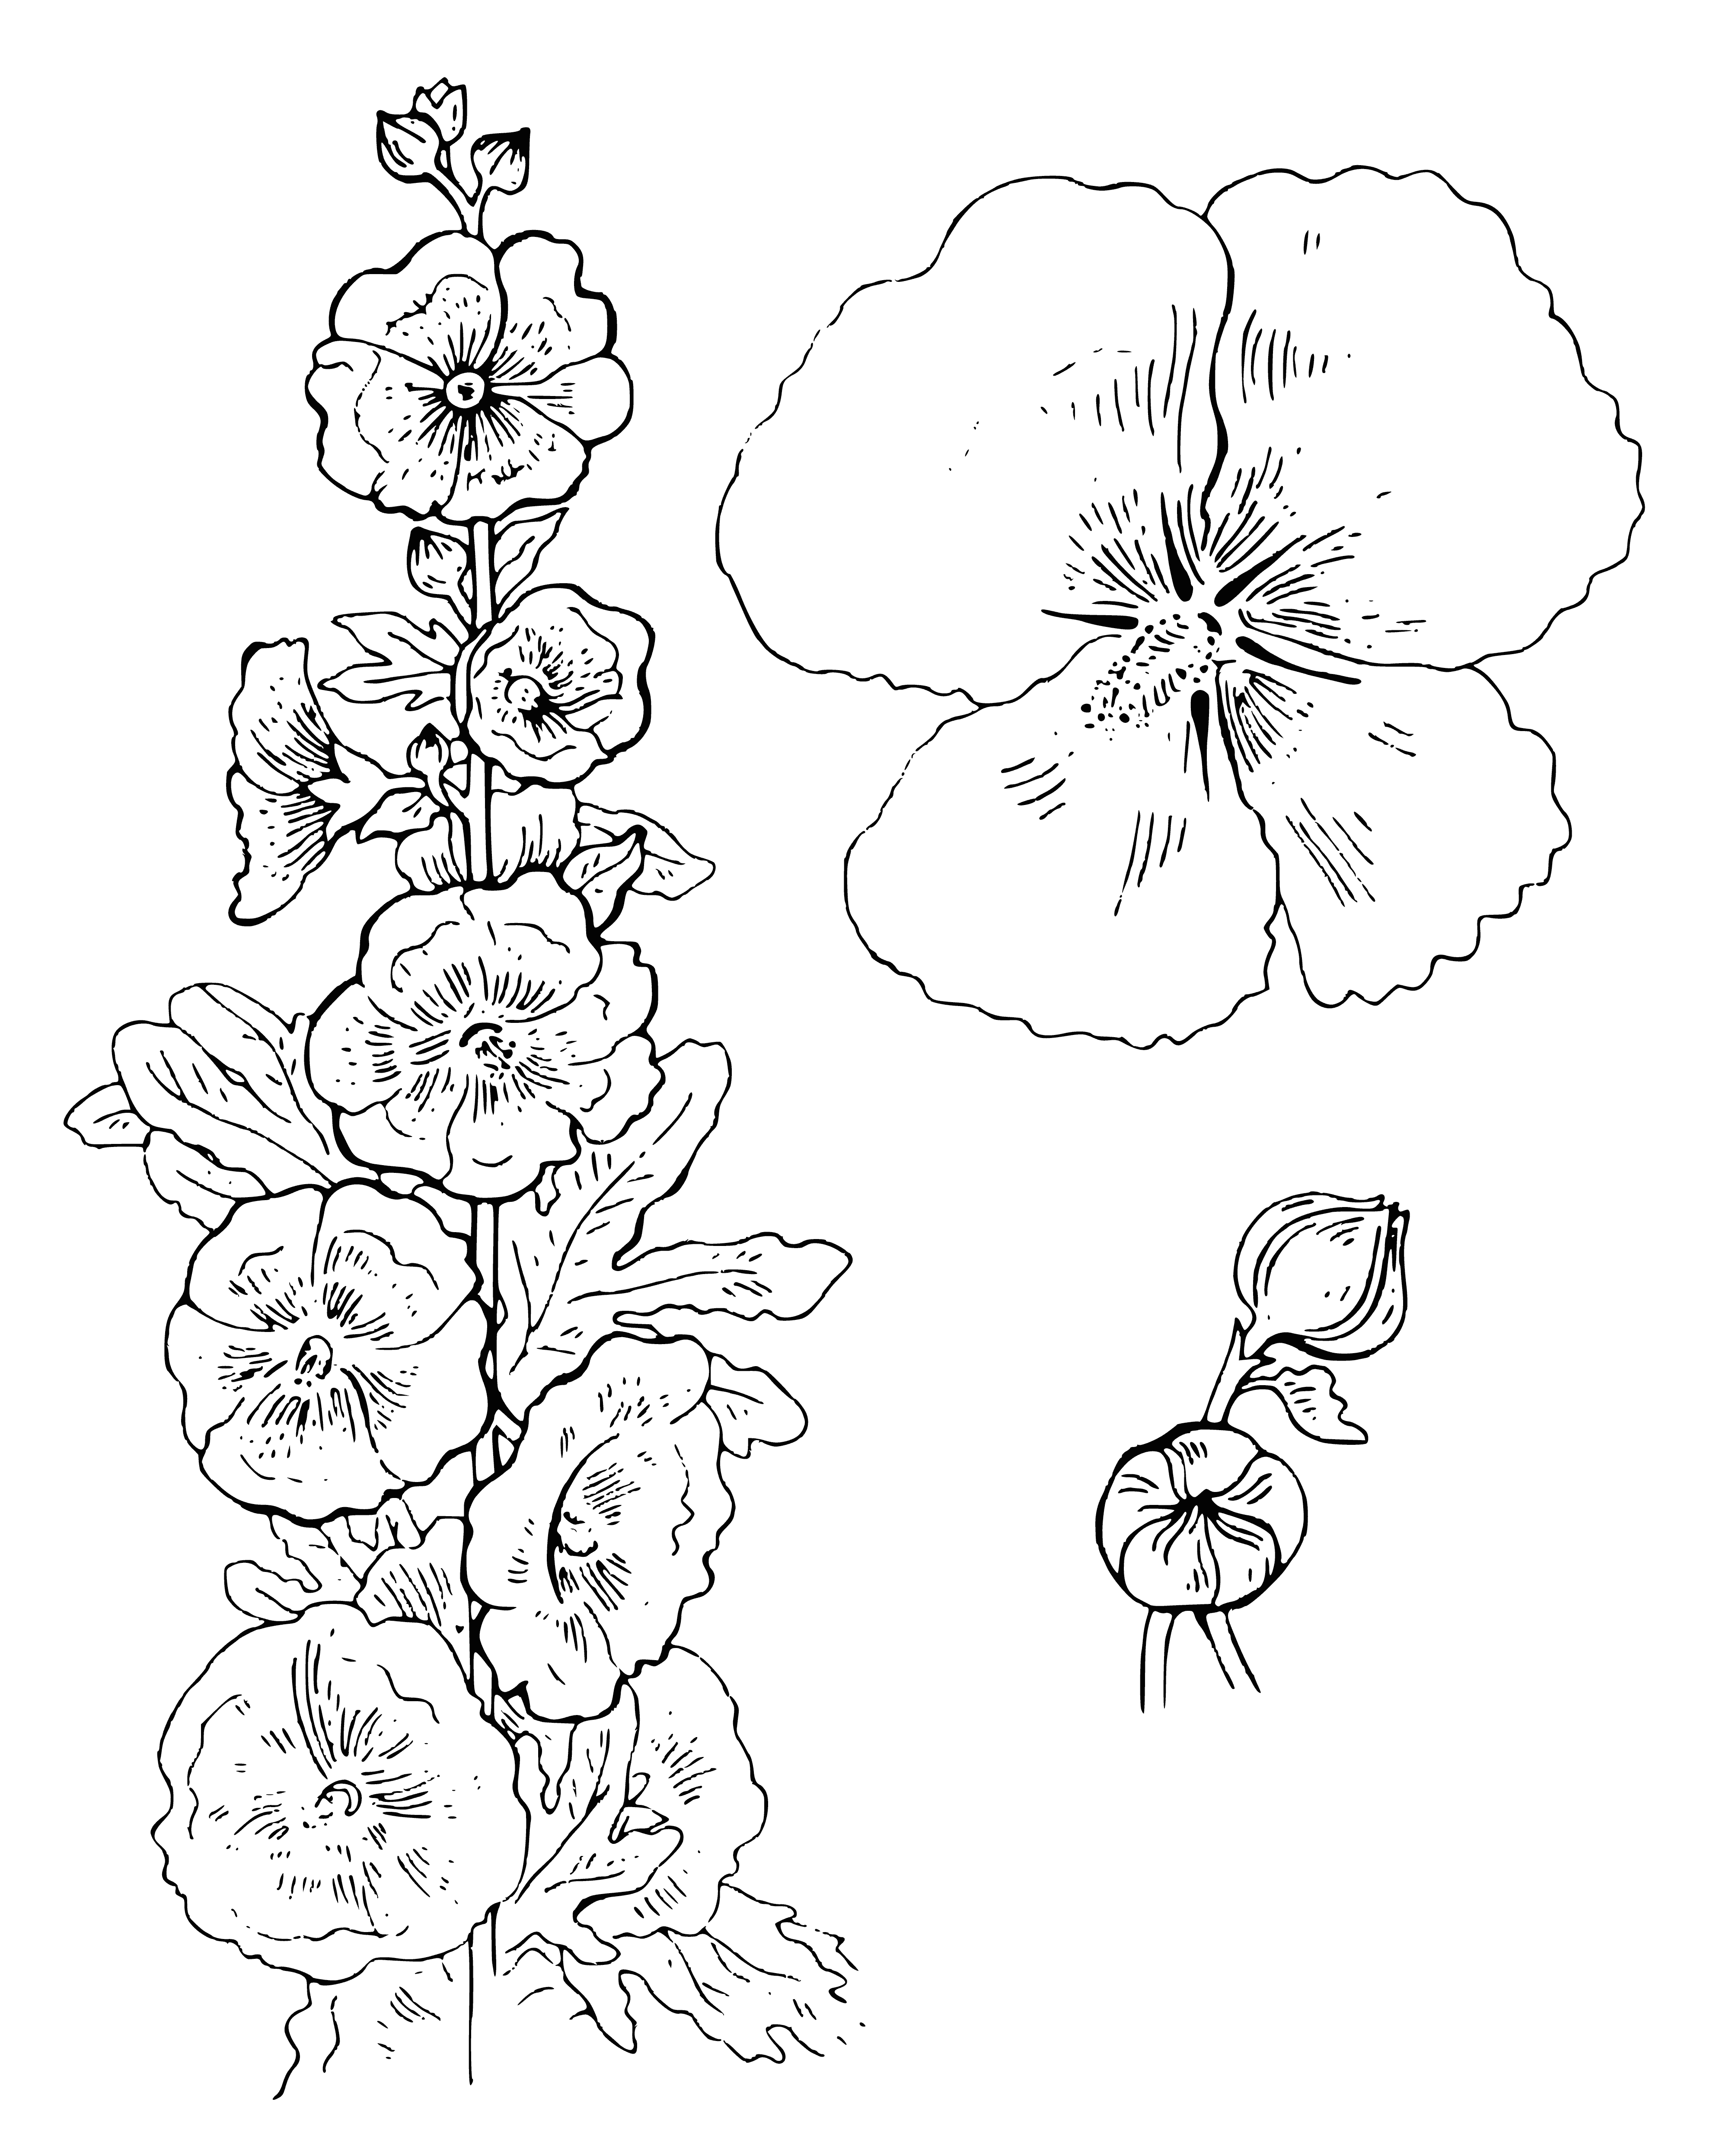 coloring page: The mallow is a flowering plant with pink/purple (or white/yellow) clusters, large leaves & hairy stem.